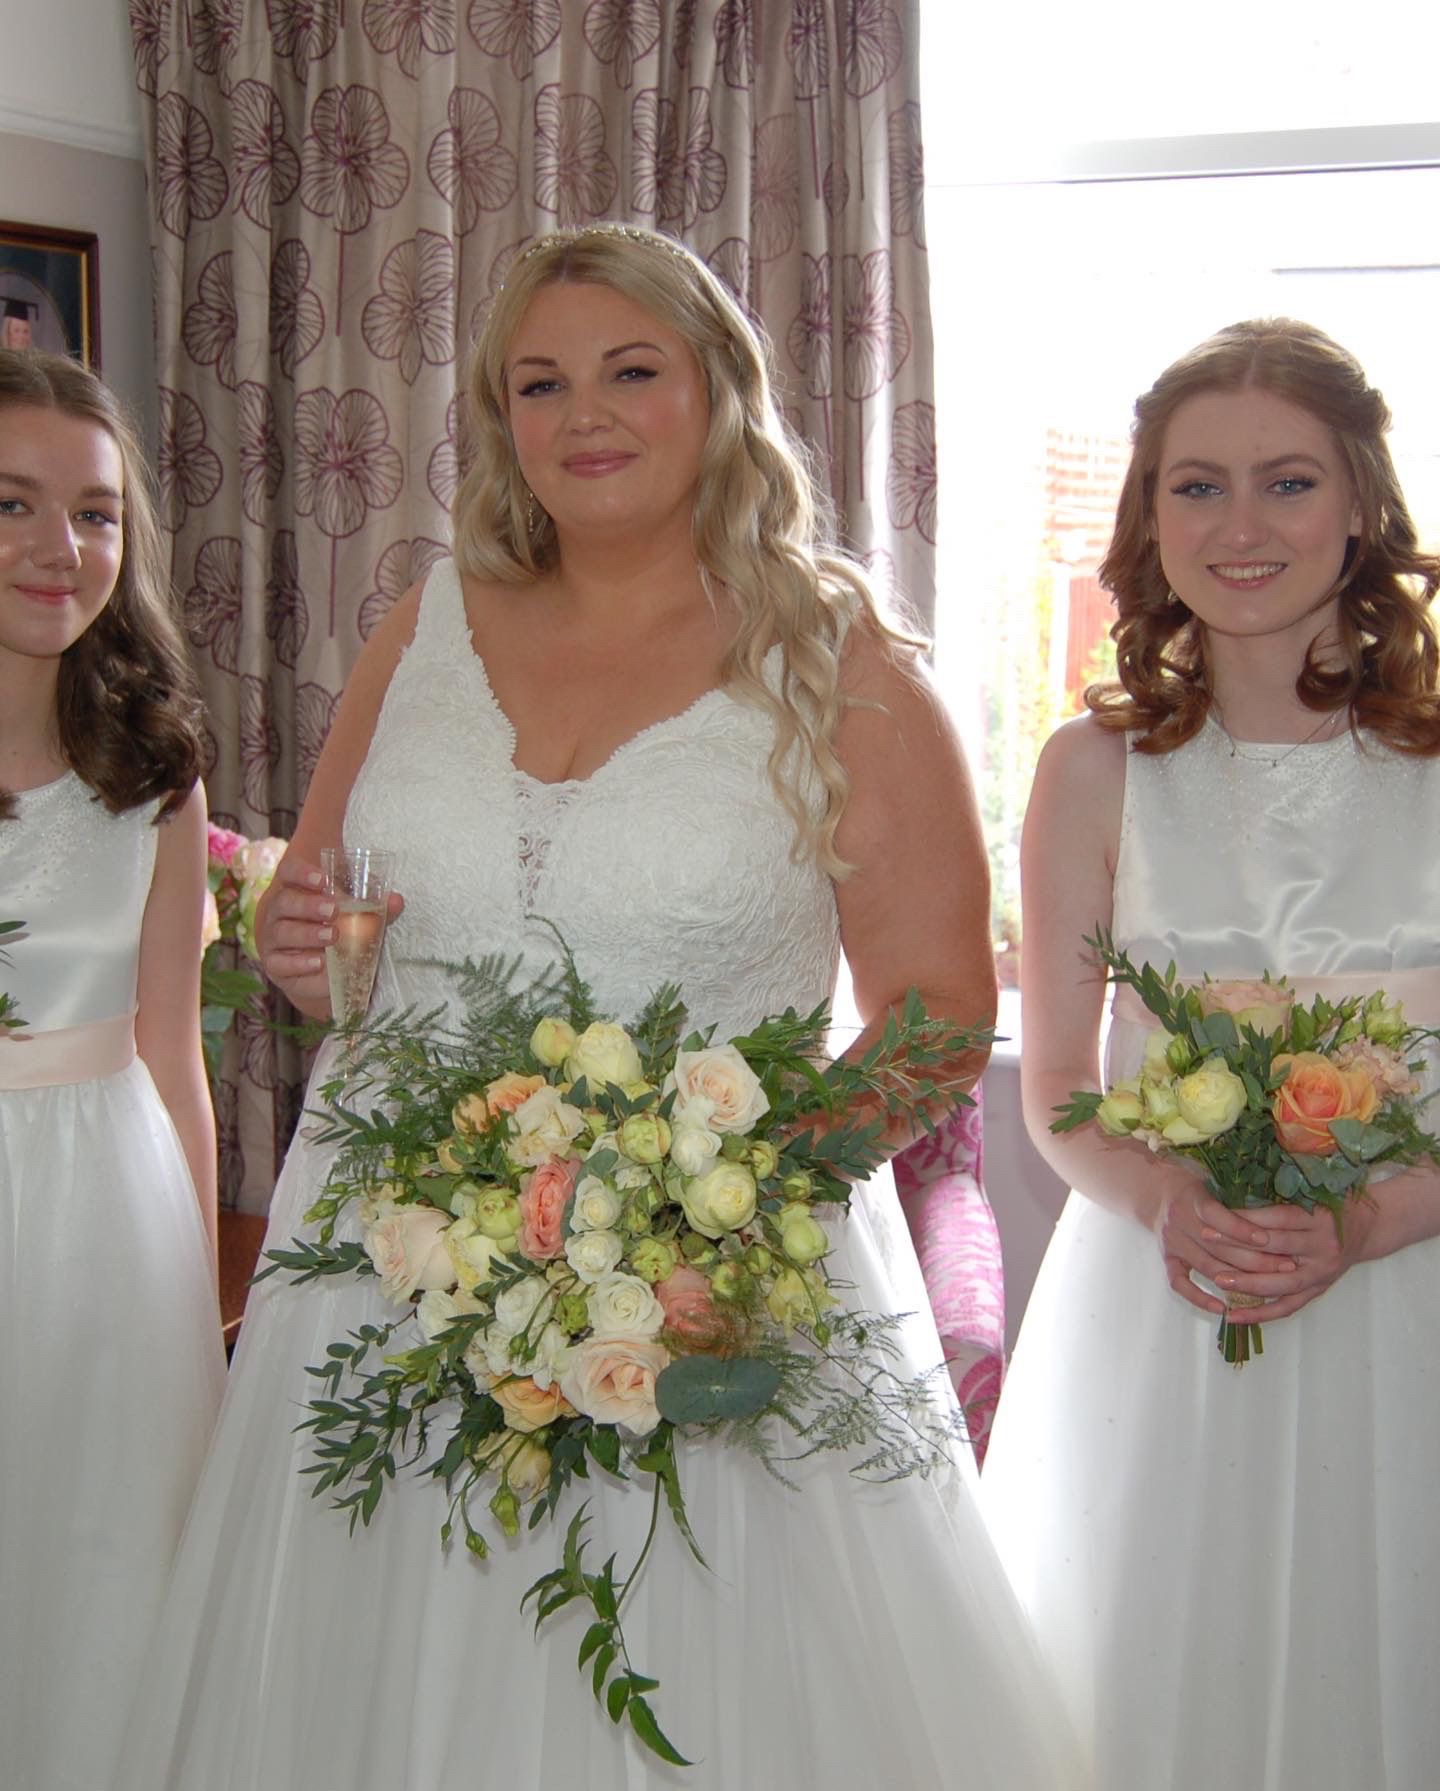 Wedding Flowers Liverpool, Merseyside, Bridal Florist,  Booker Flowers and Gifts, Booker Weddings | Charlotte Dover